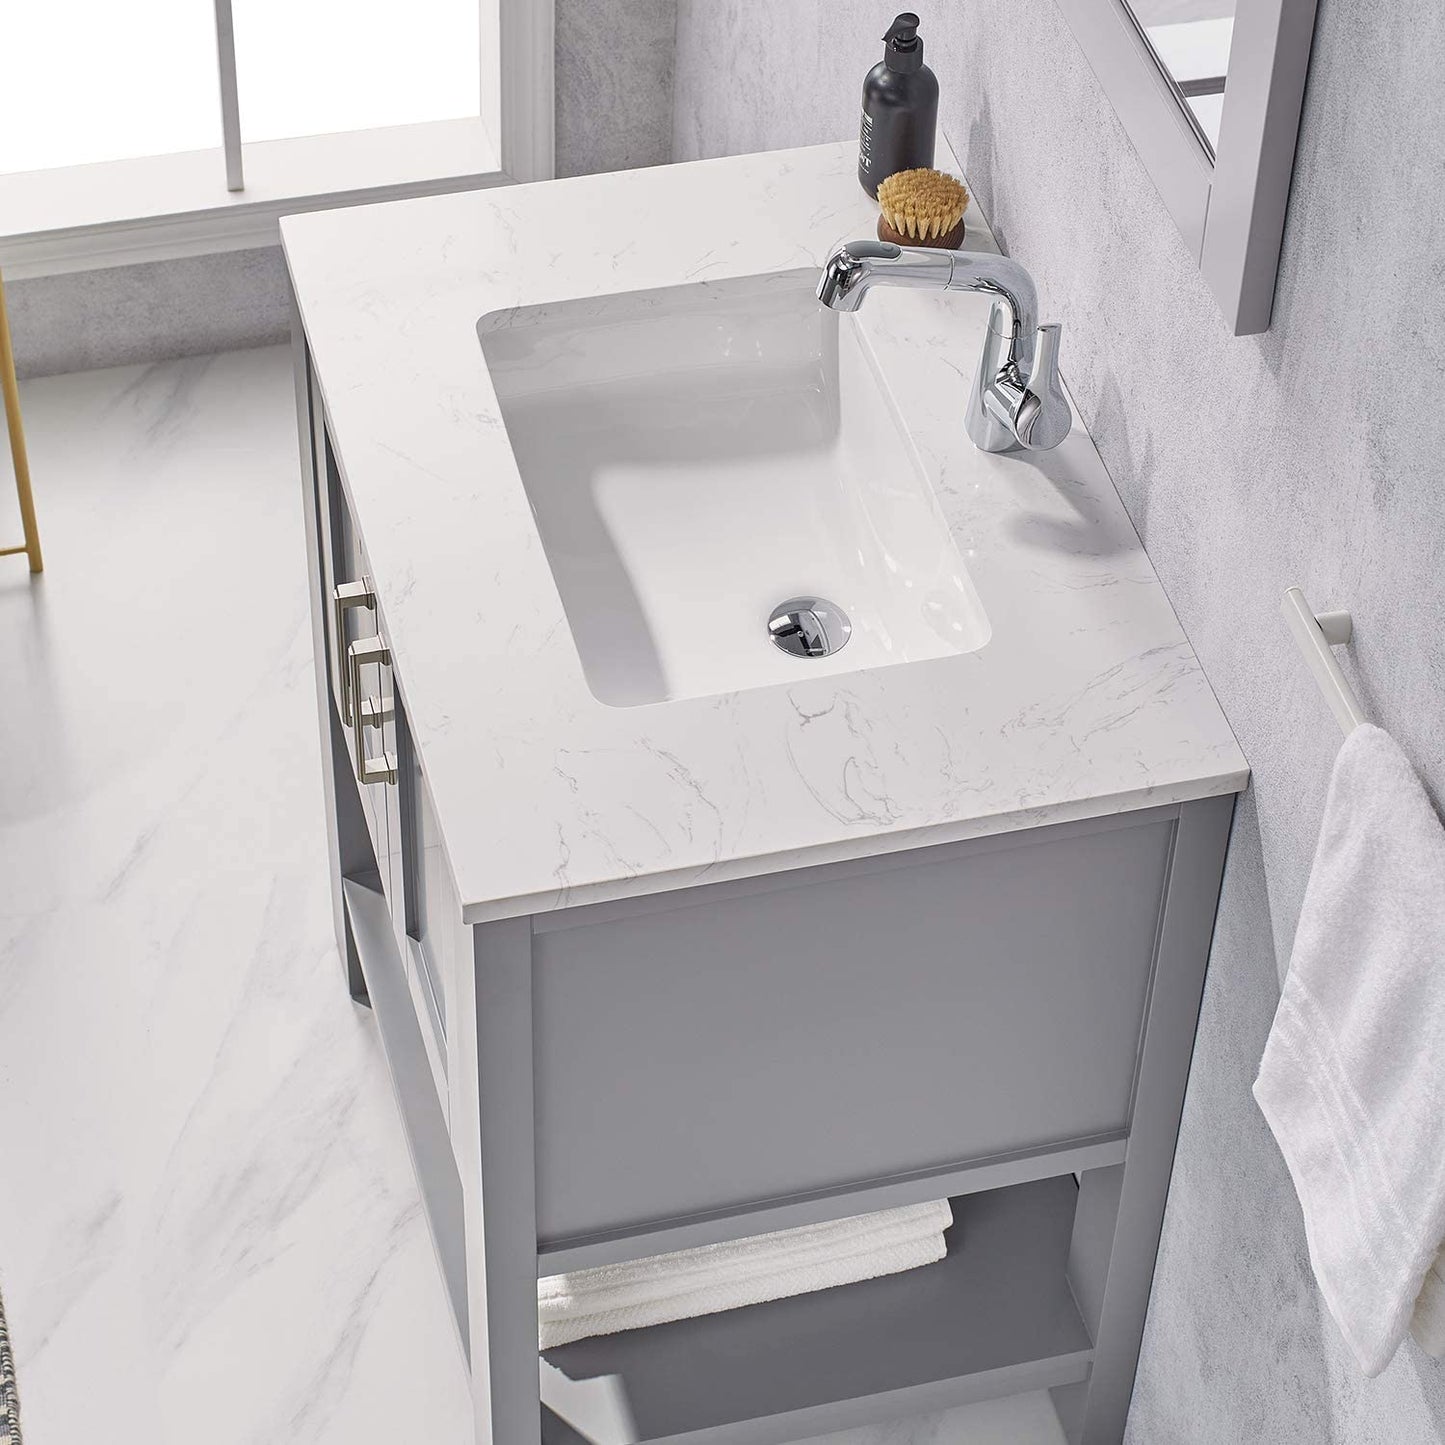 FR Gray Bathroom Vanity, 30 Inch with Marble Countertop and White Ceramic Sink